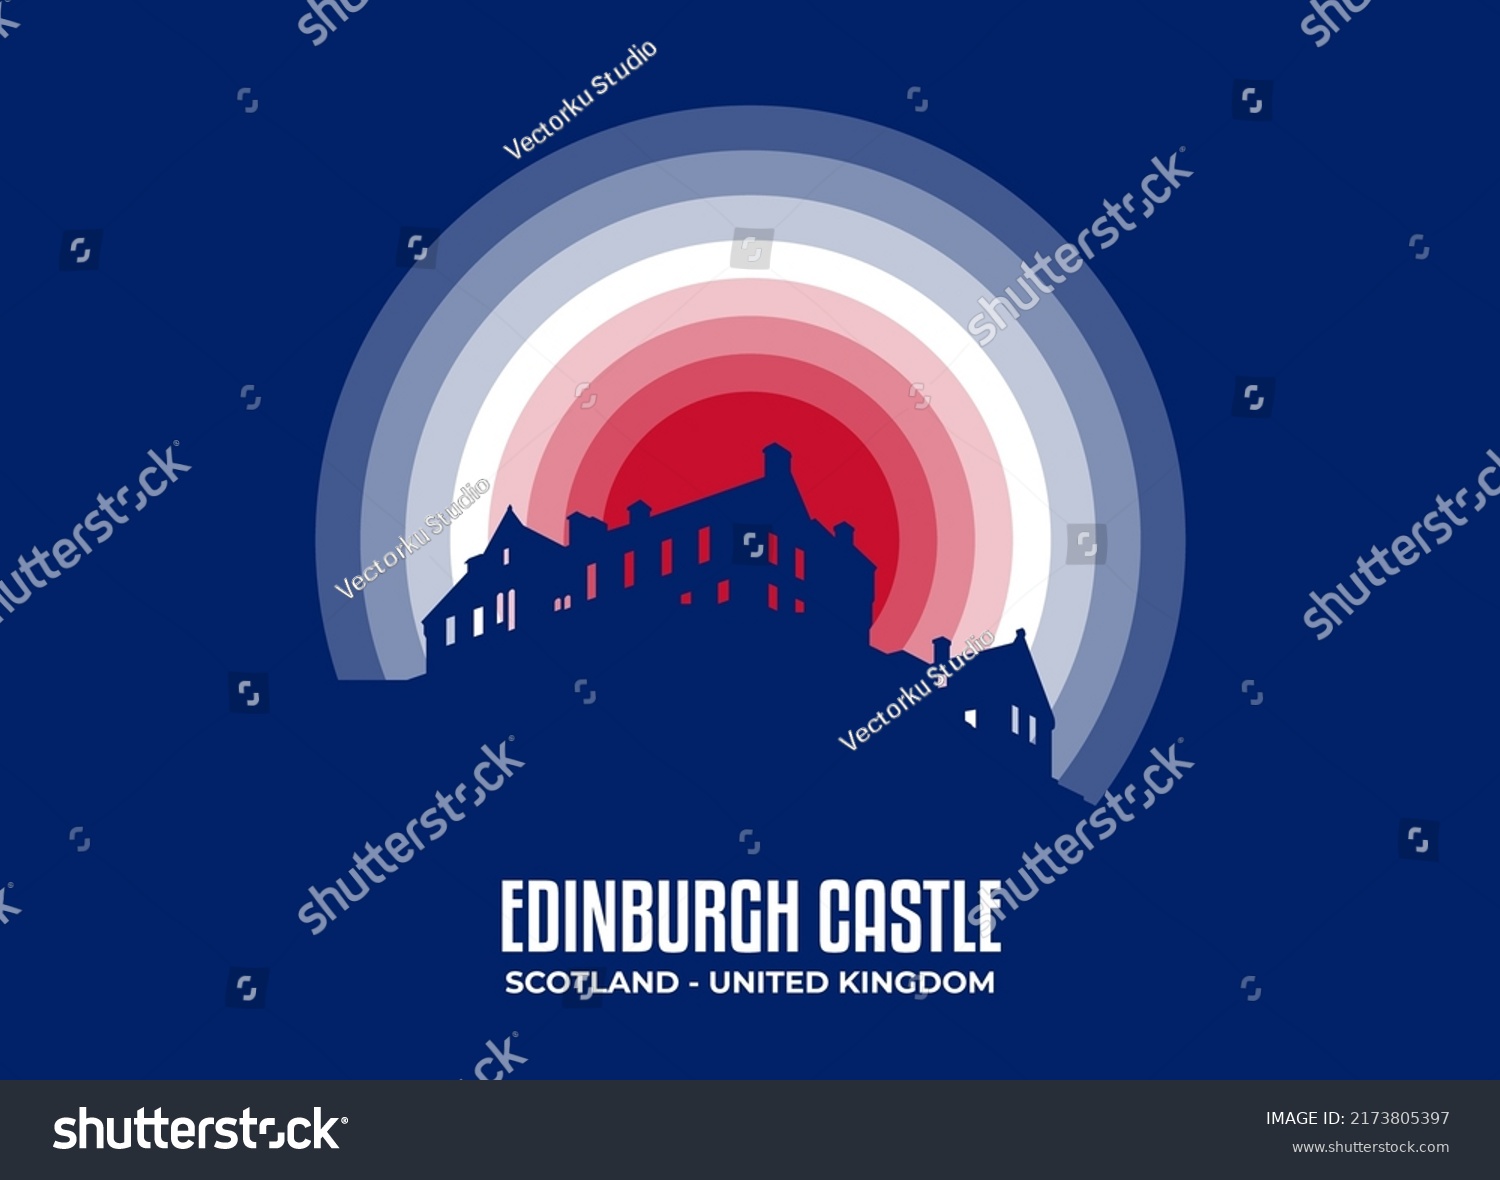 SVG of Edinburgh Castle illustration. Famous statue and building in moonlight illustration. Color tone based on official country flag. Vector eps 10. svg